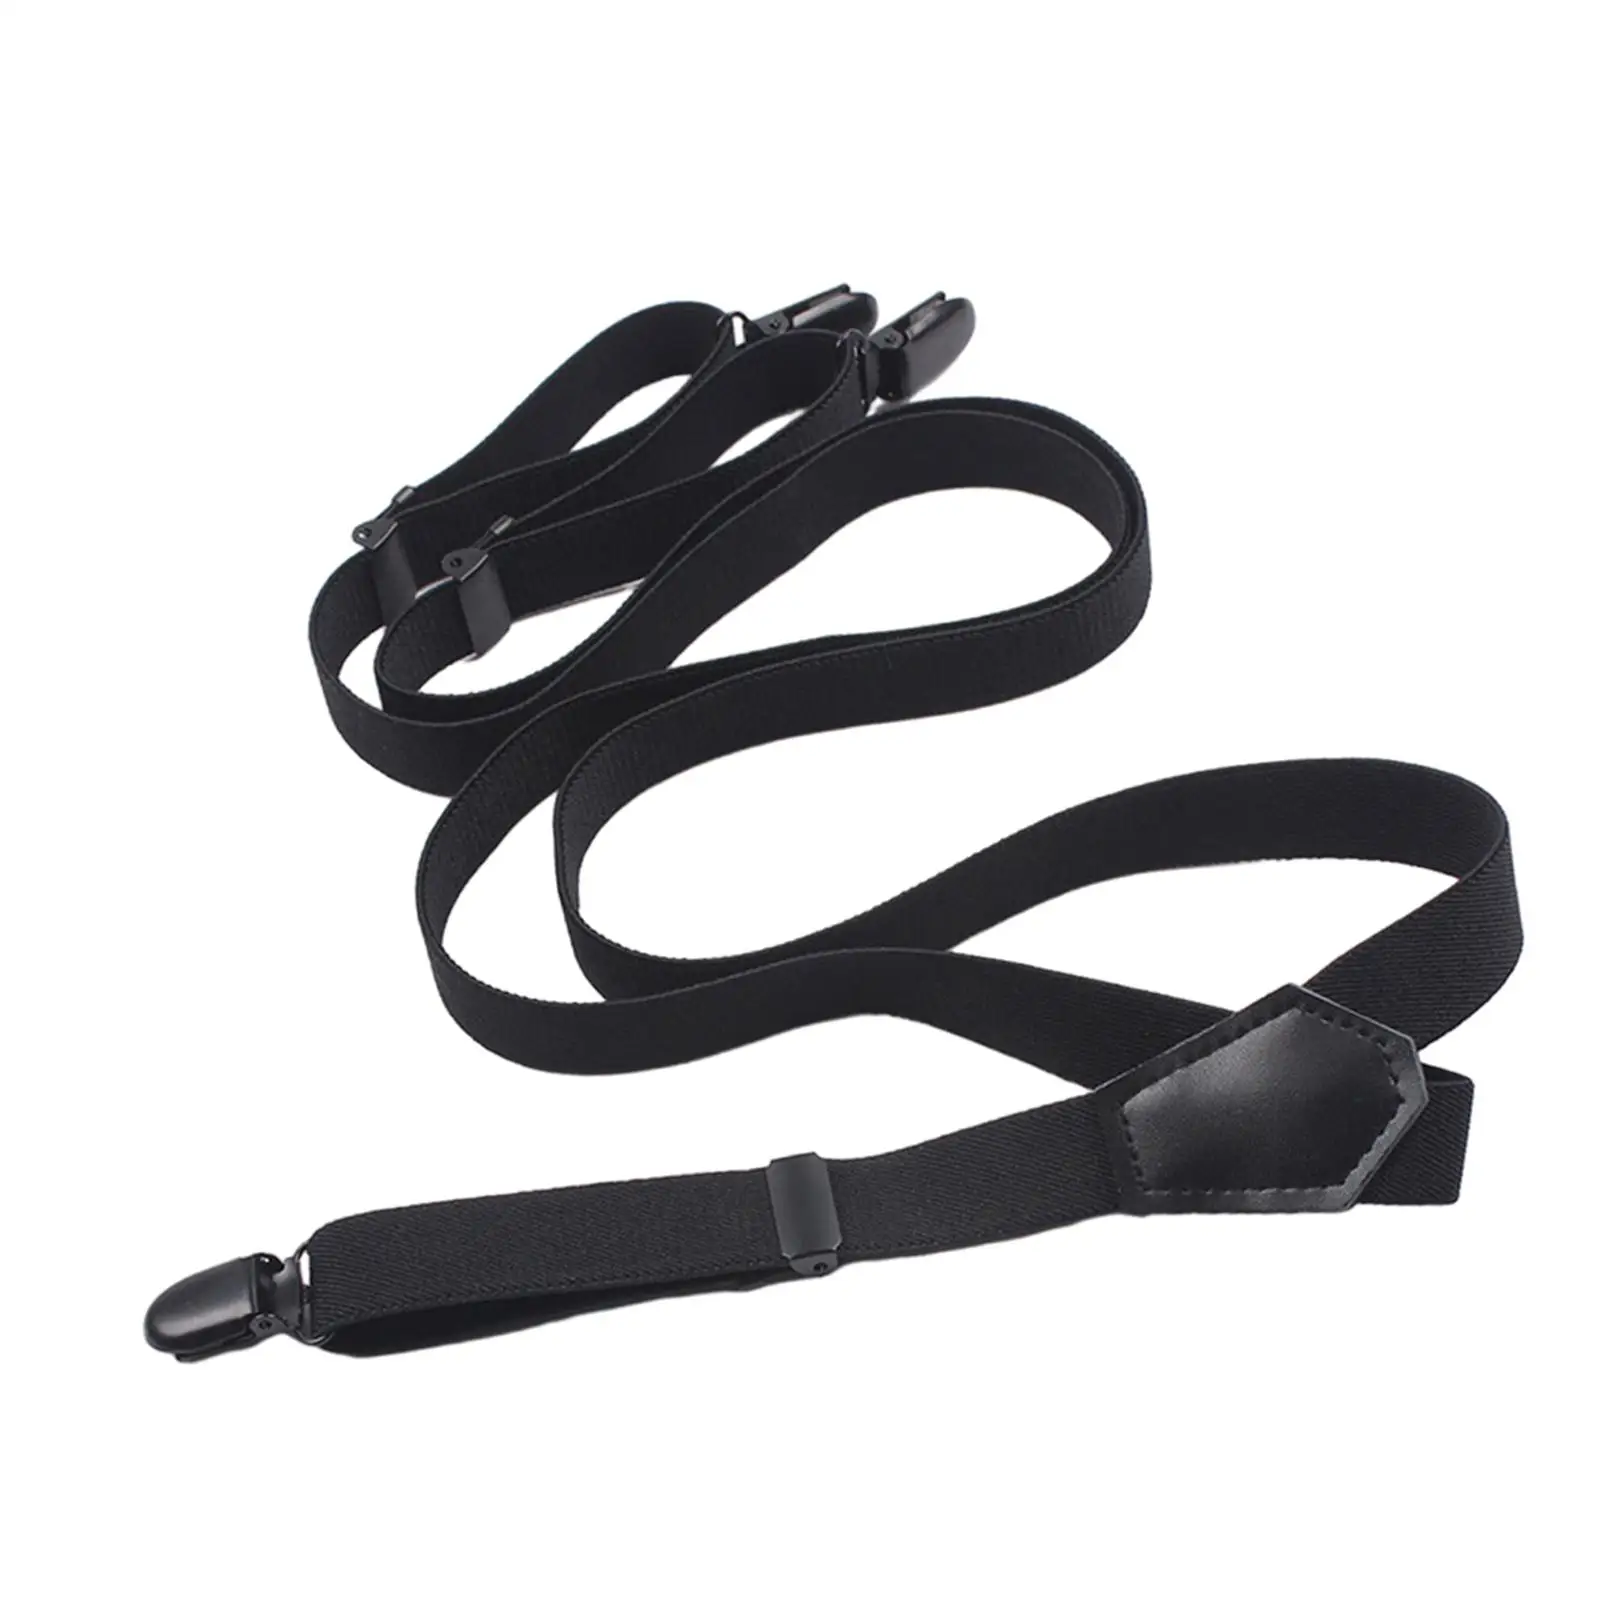 Men`s Suspenders Durable 2cm Wide Belt Adjustable Leather Strap Fashion with 3 Clips Elastic Straps Father/husband`s Gift